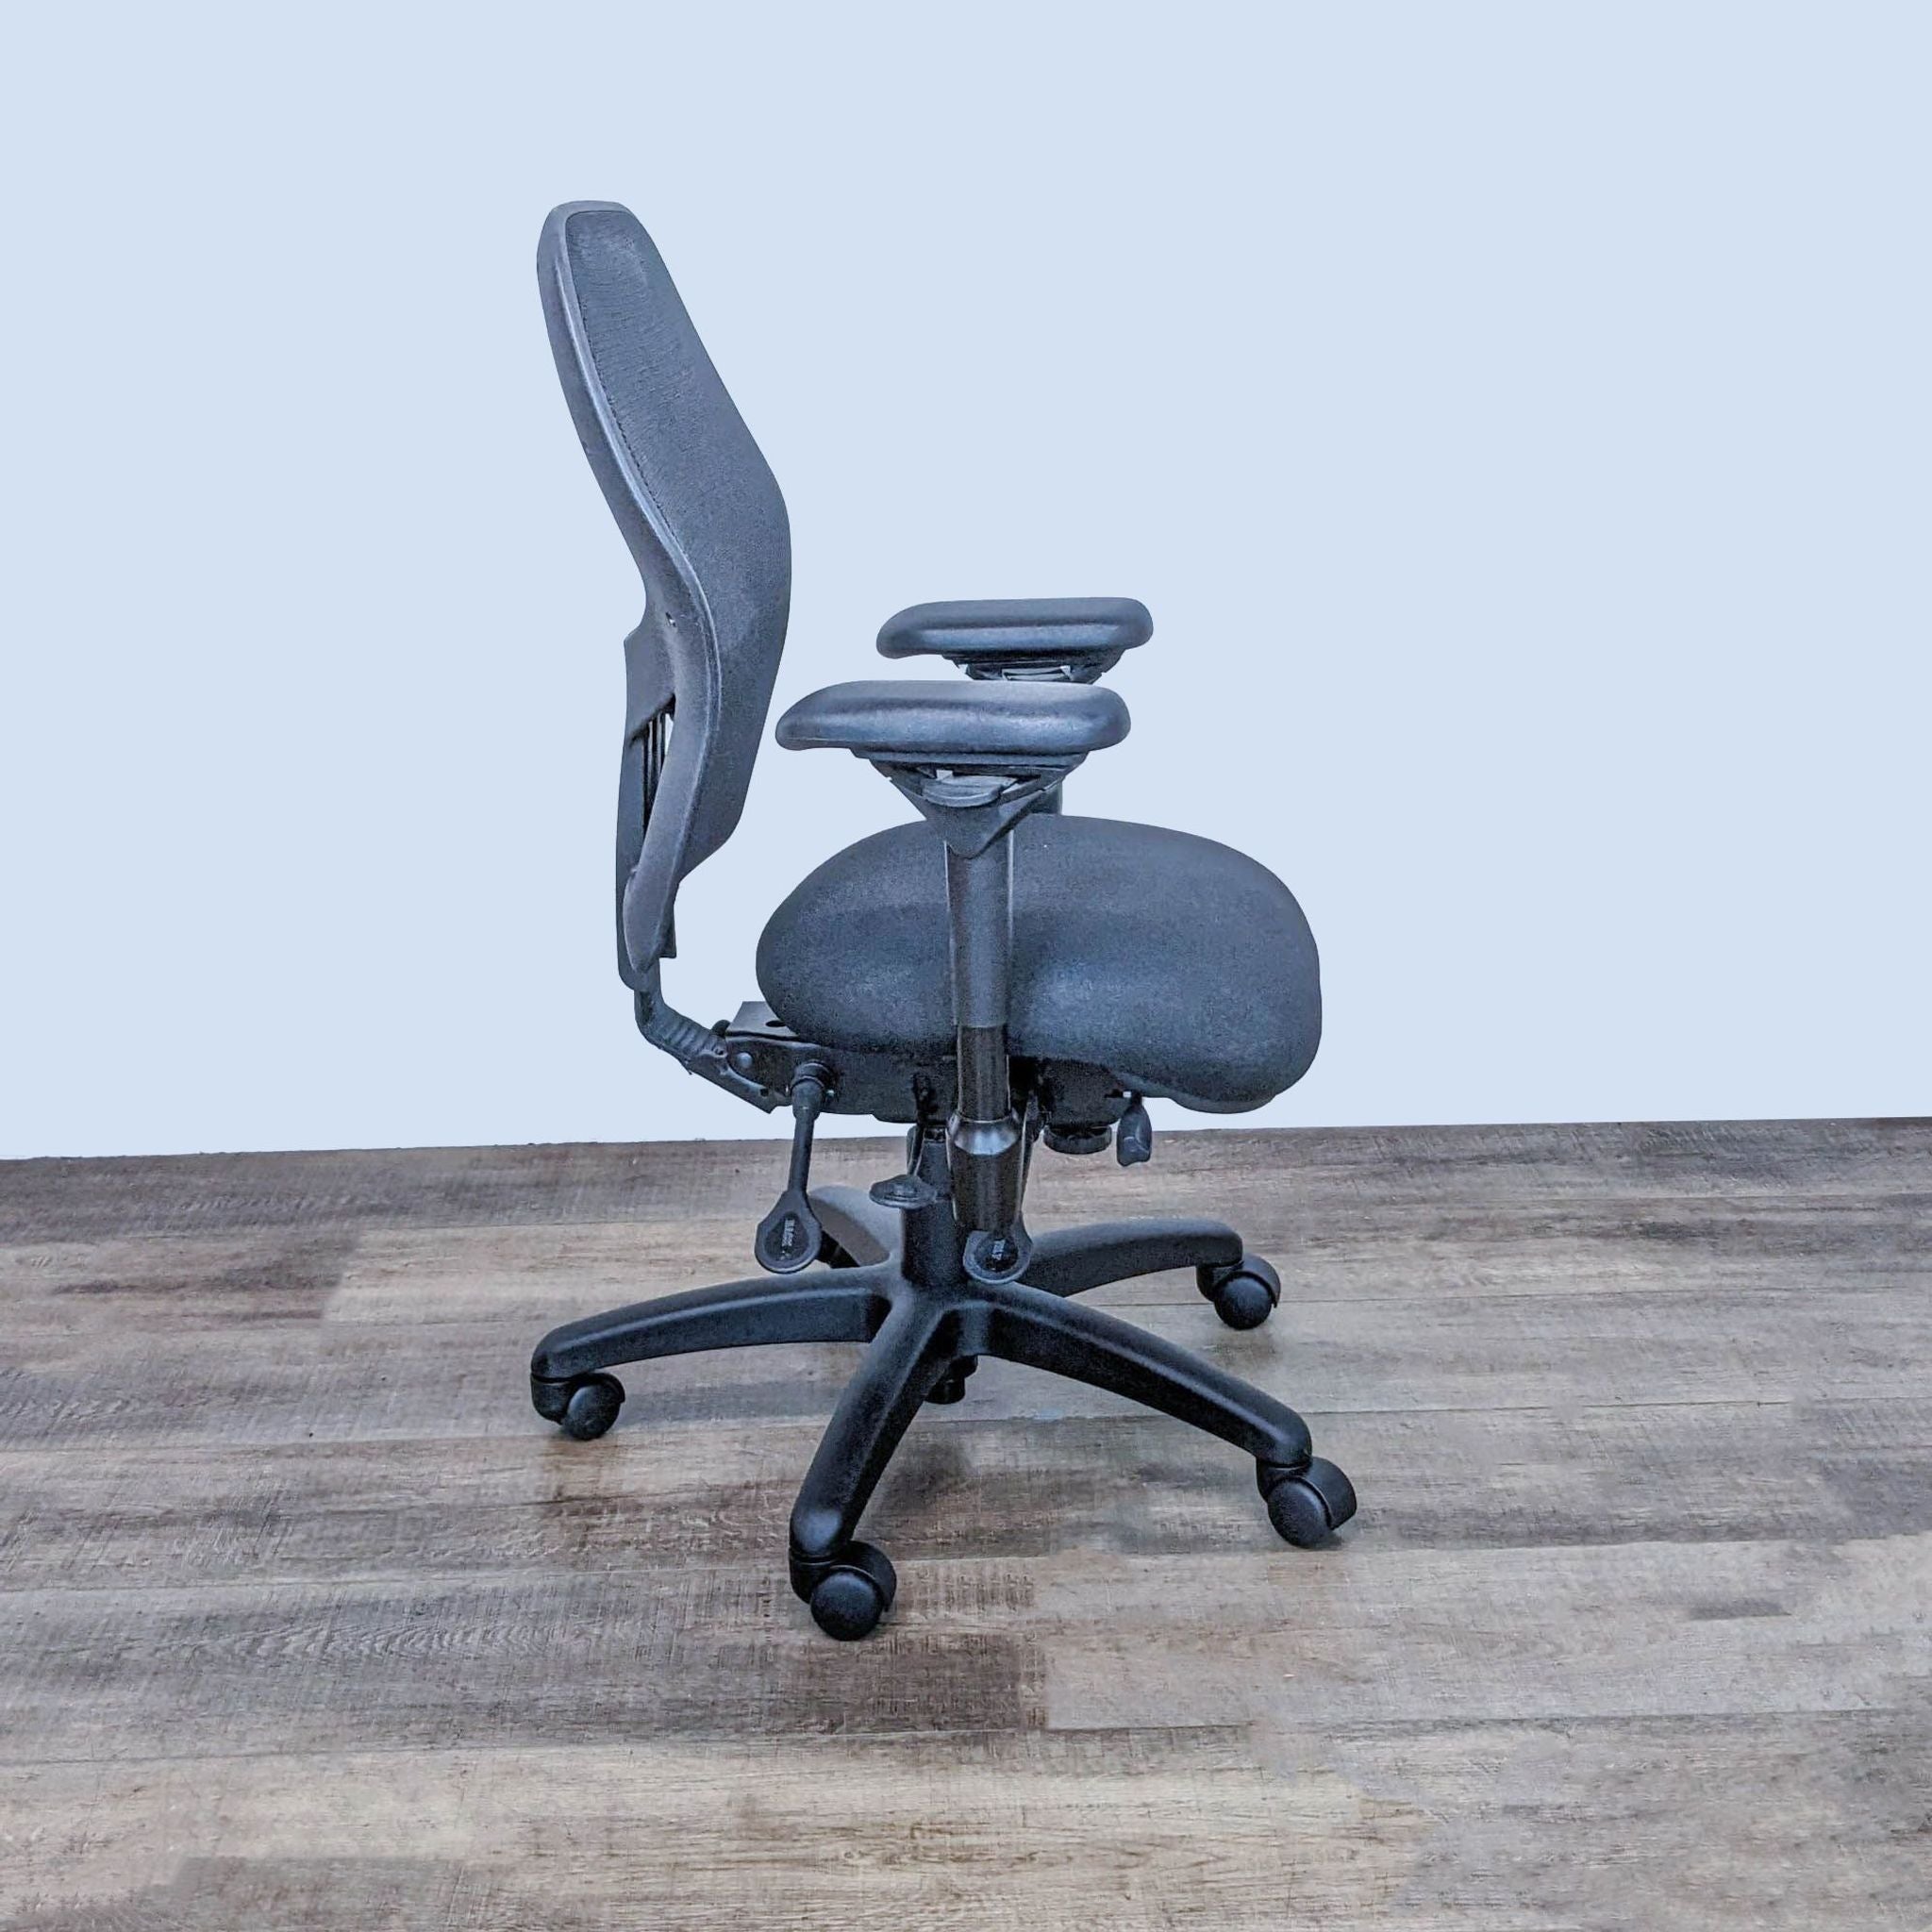 Ergonomic black Bodybilt chair with lumbar support and height-adjustable features, front and side views.